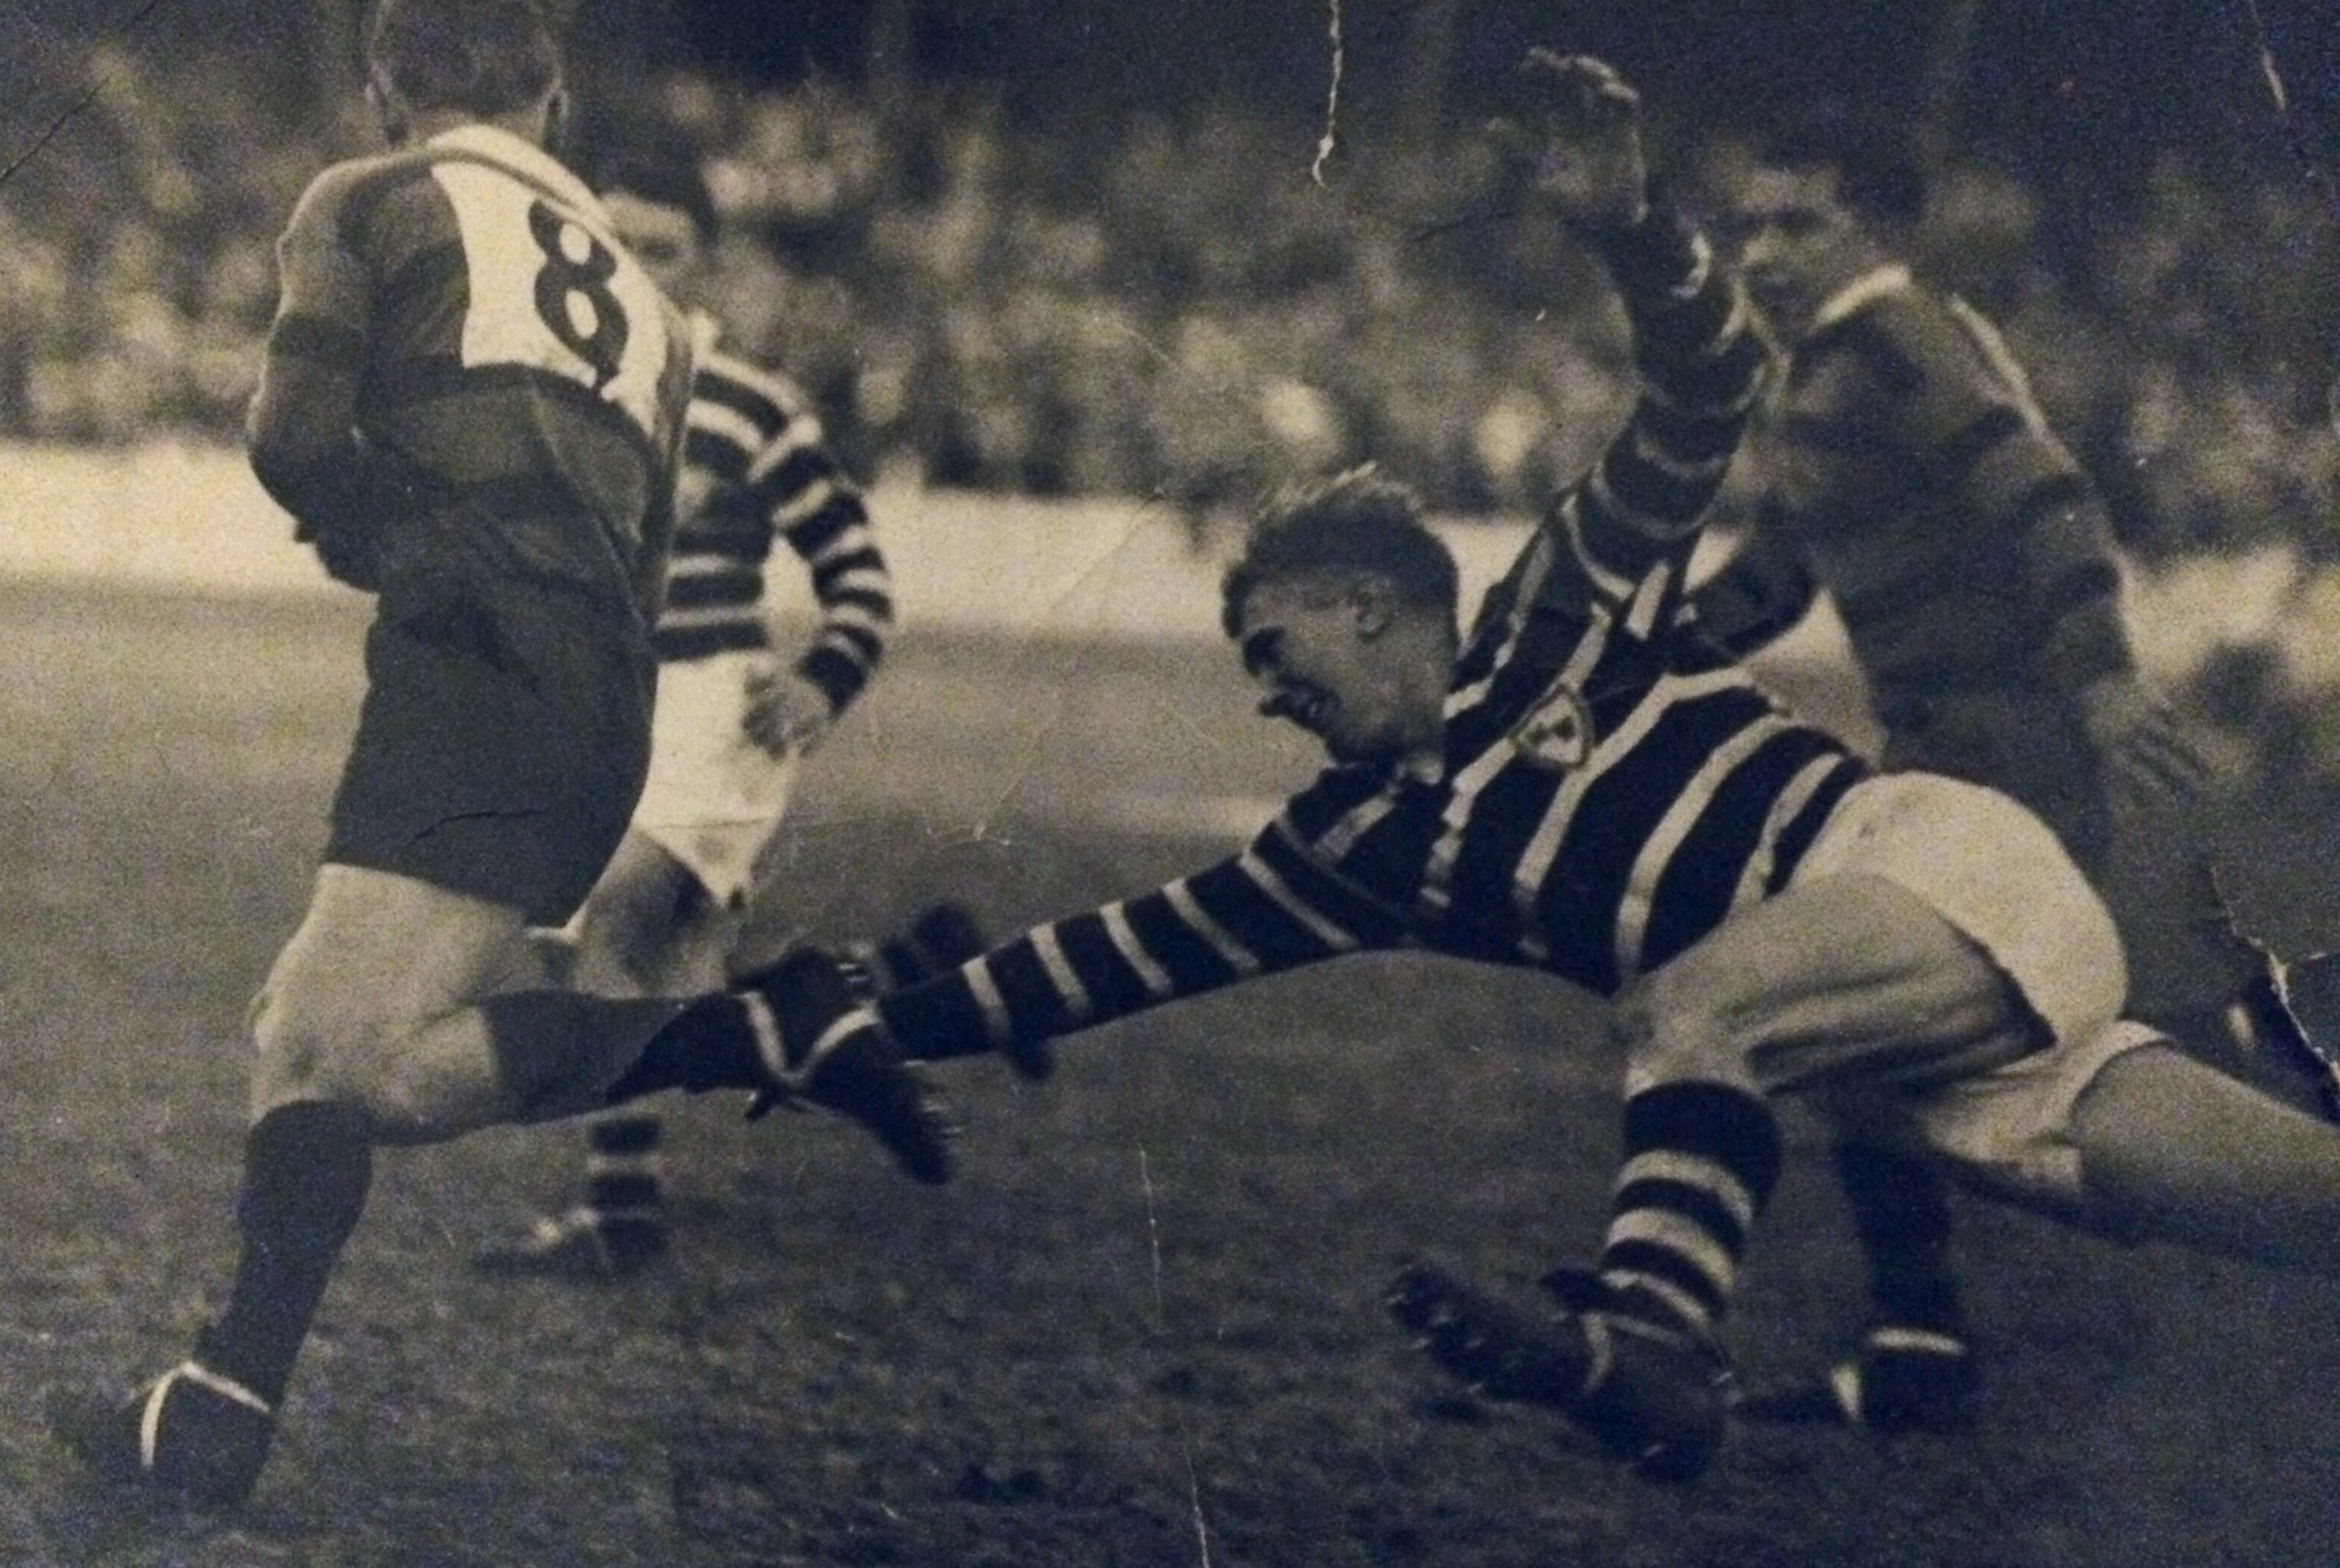 Dad playing in the Newcastle league about 1956.